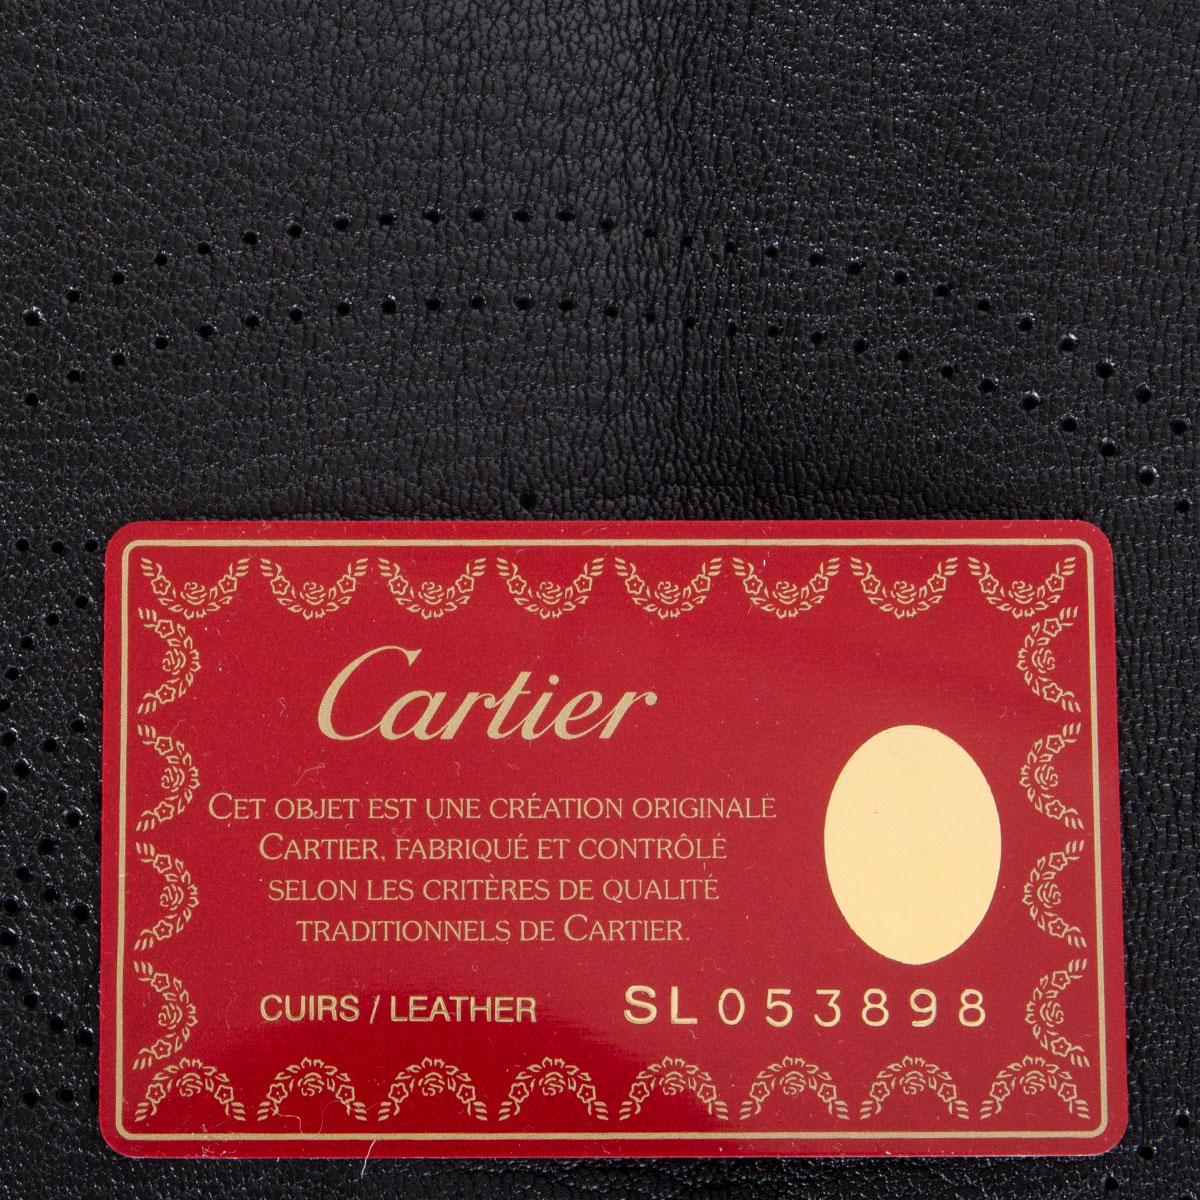 CARTIER black leather MARCELLO DE CARTIER PM FOLD-OVER Clutch Bag In Excellent Condition For Sale In Zürich, CH